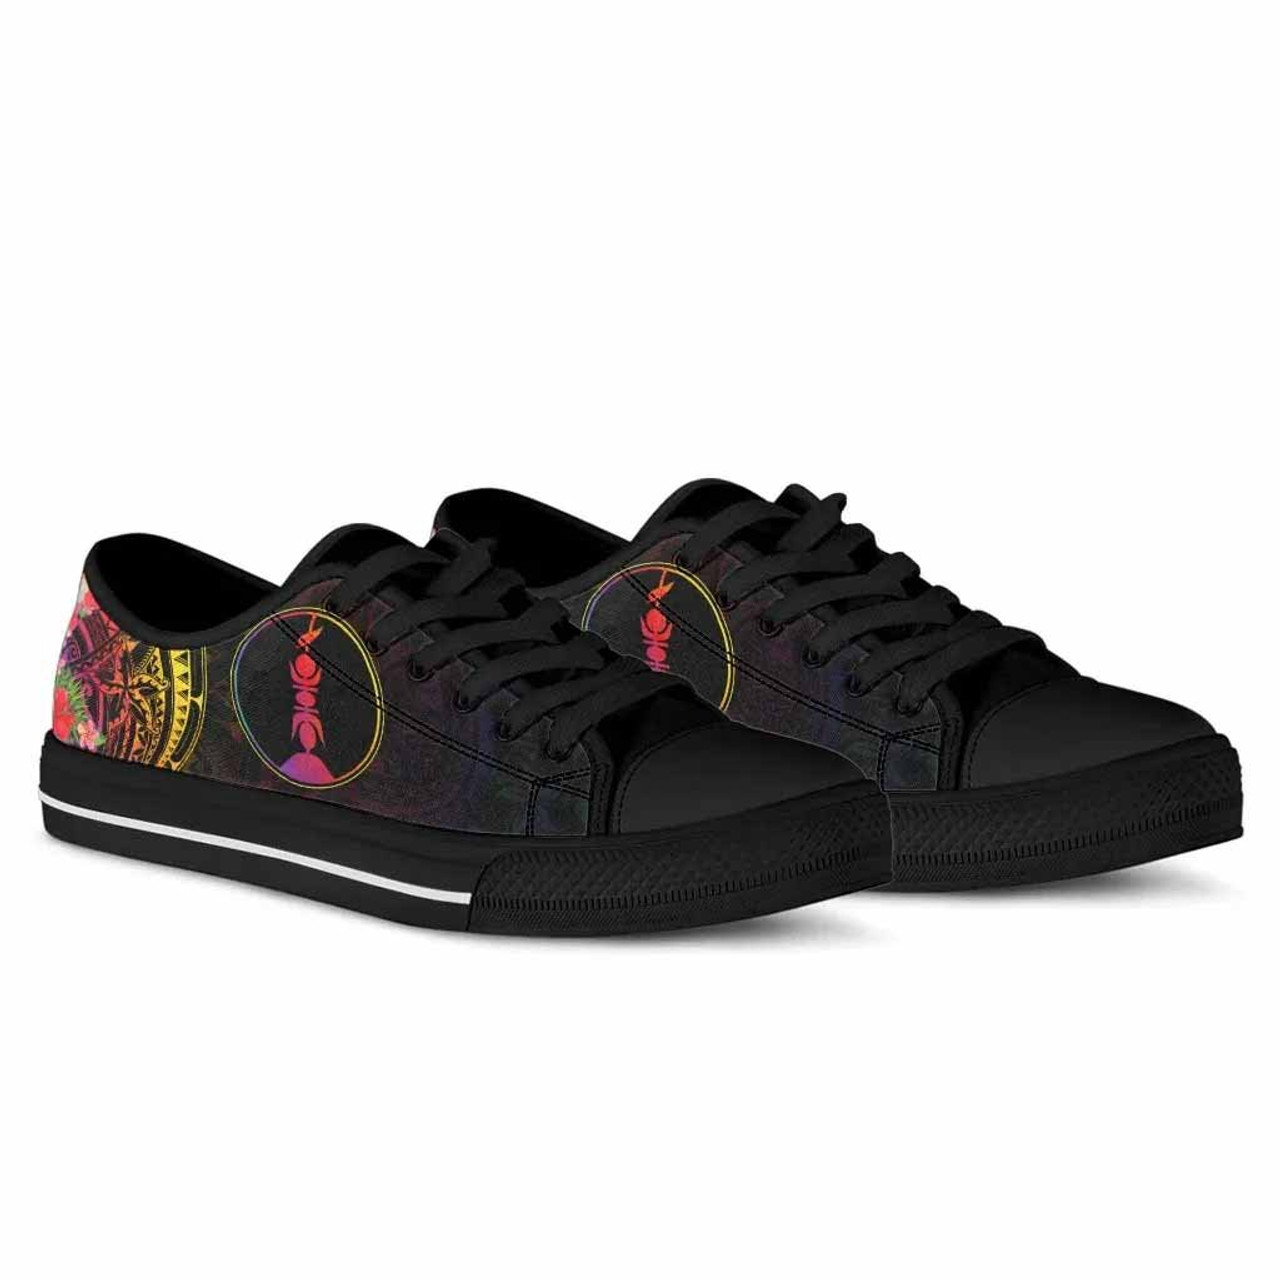 New Caledonia Low Top Shoes - Tropical Hippie Style 2